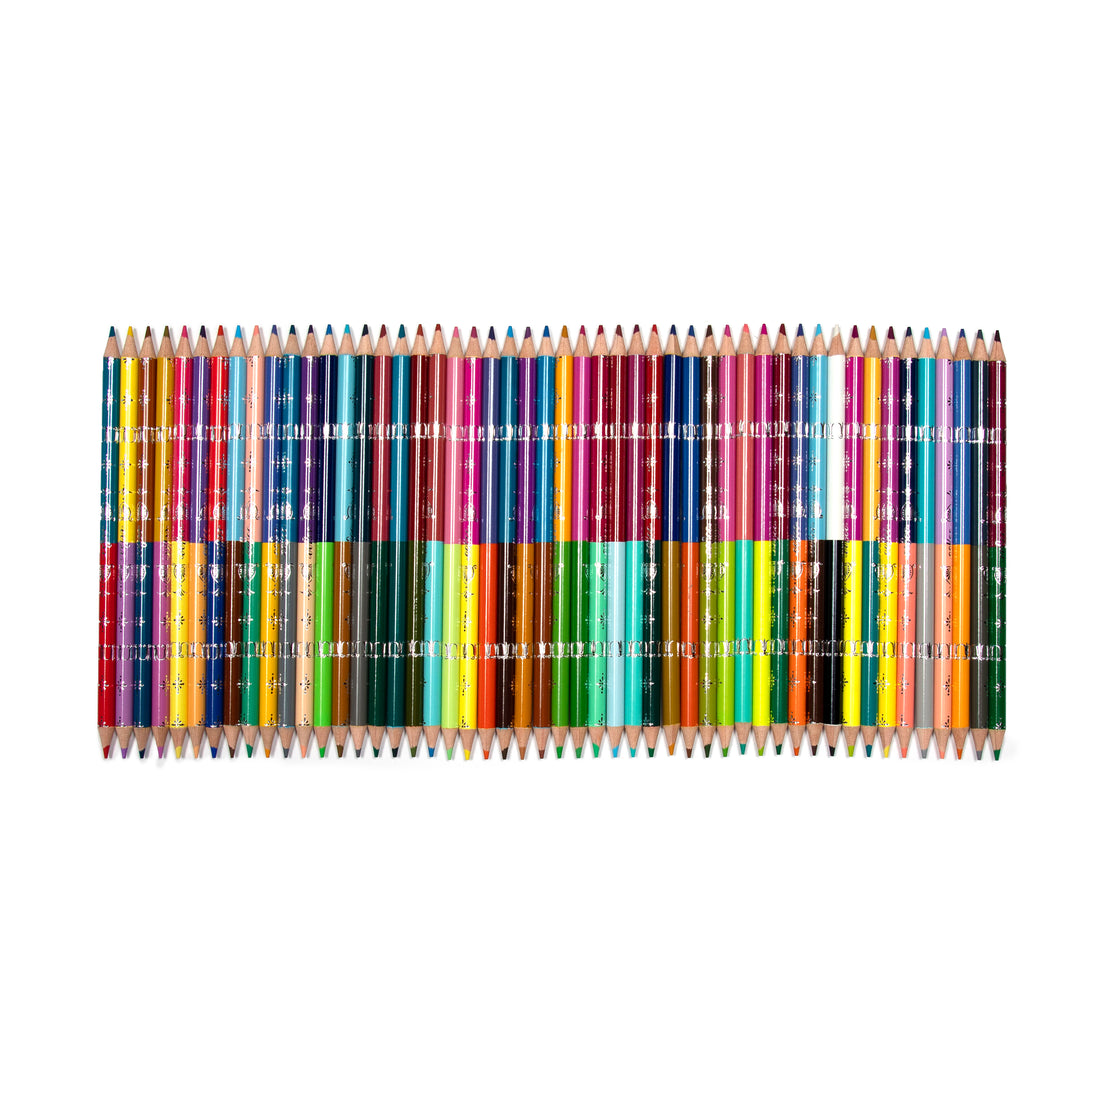 Double the Fun: Exploring the Innovation of Double-Sided Color Pencils for Kids